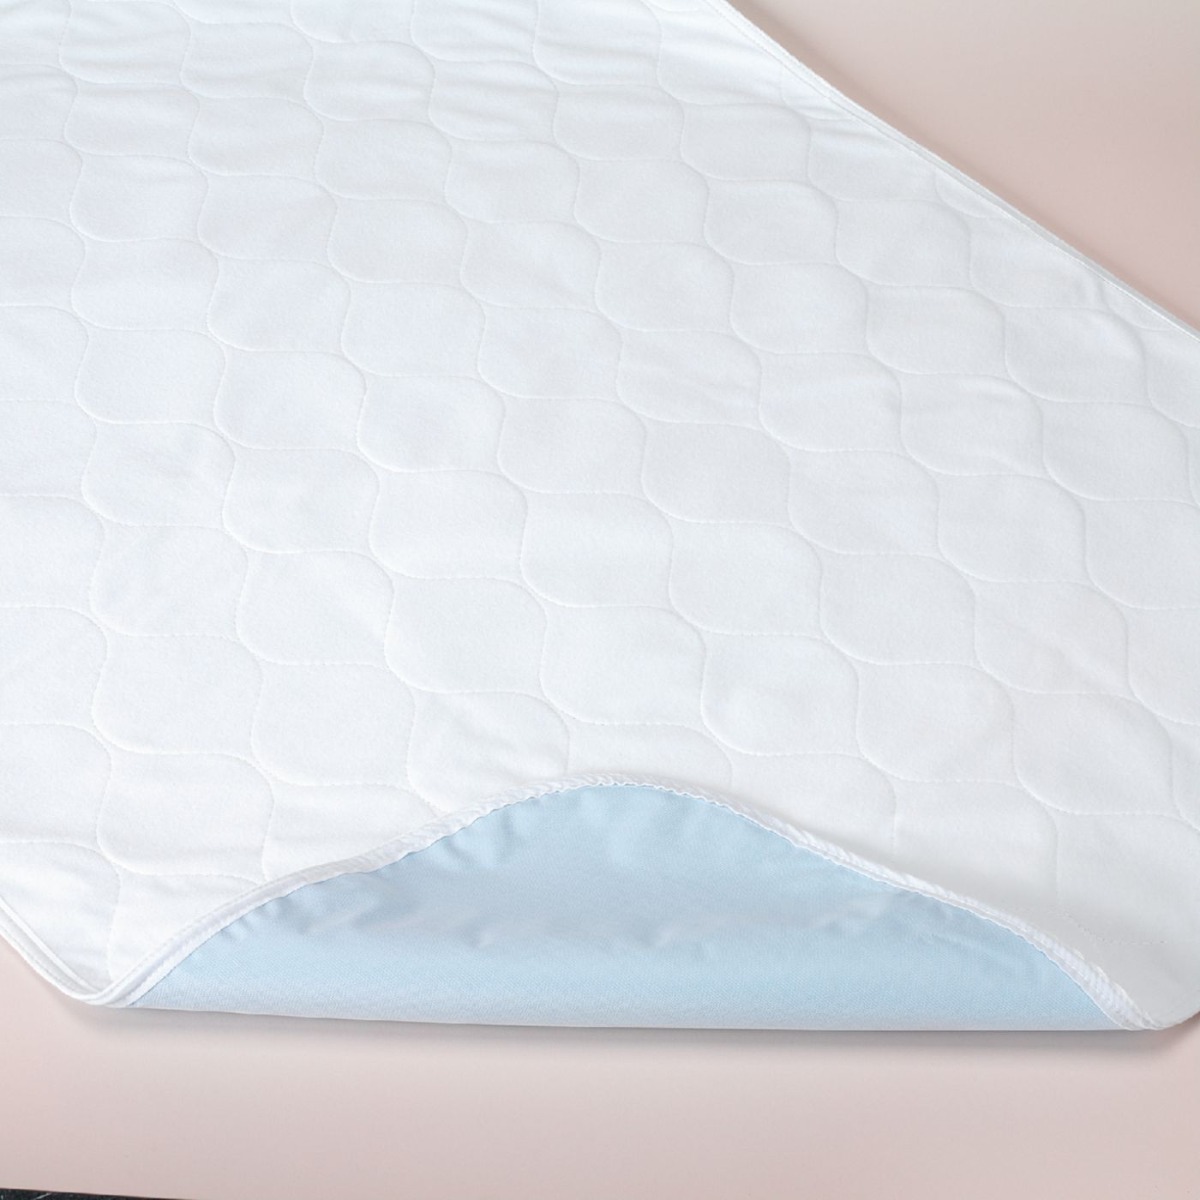 Deluxe Reusable Quilted Underpad